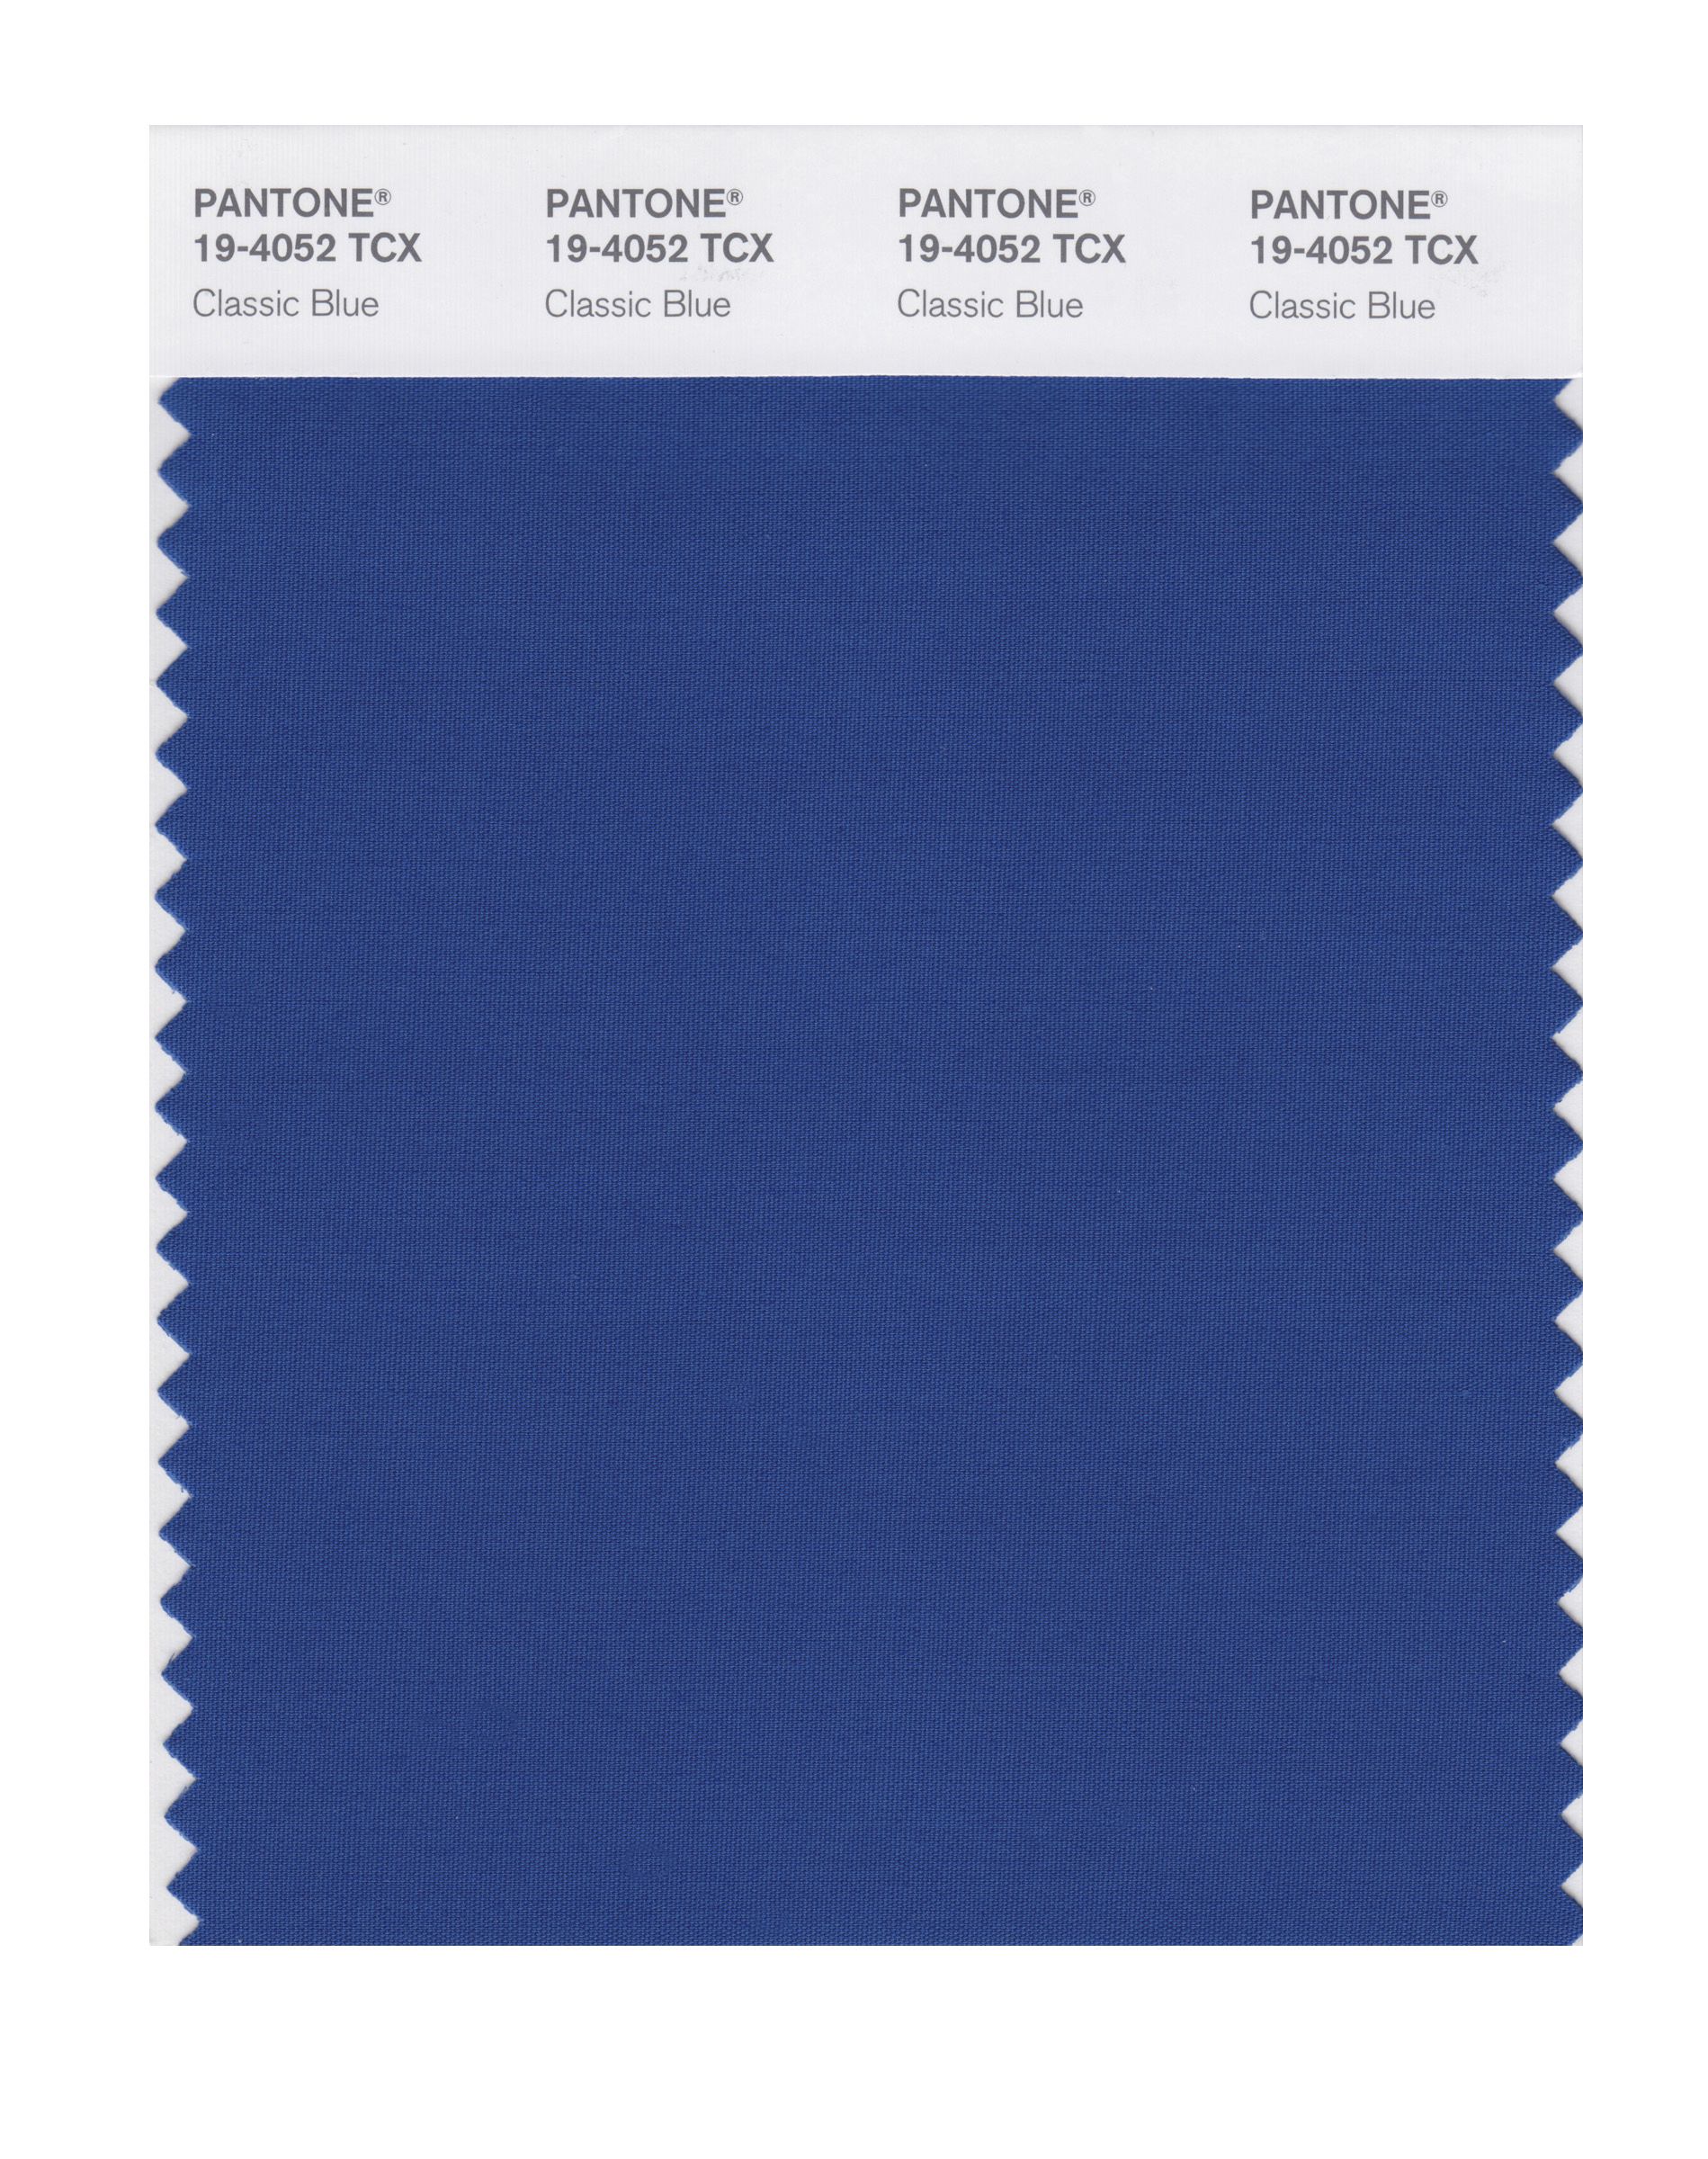 Classic Blue by Pantone